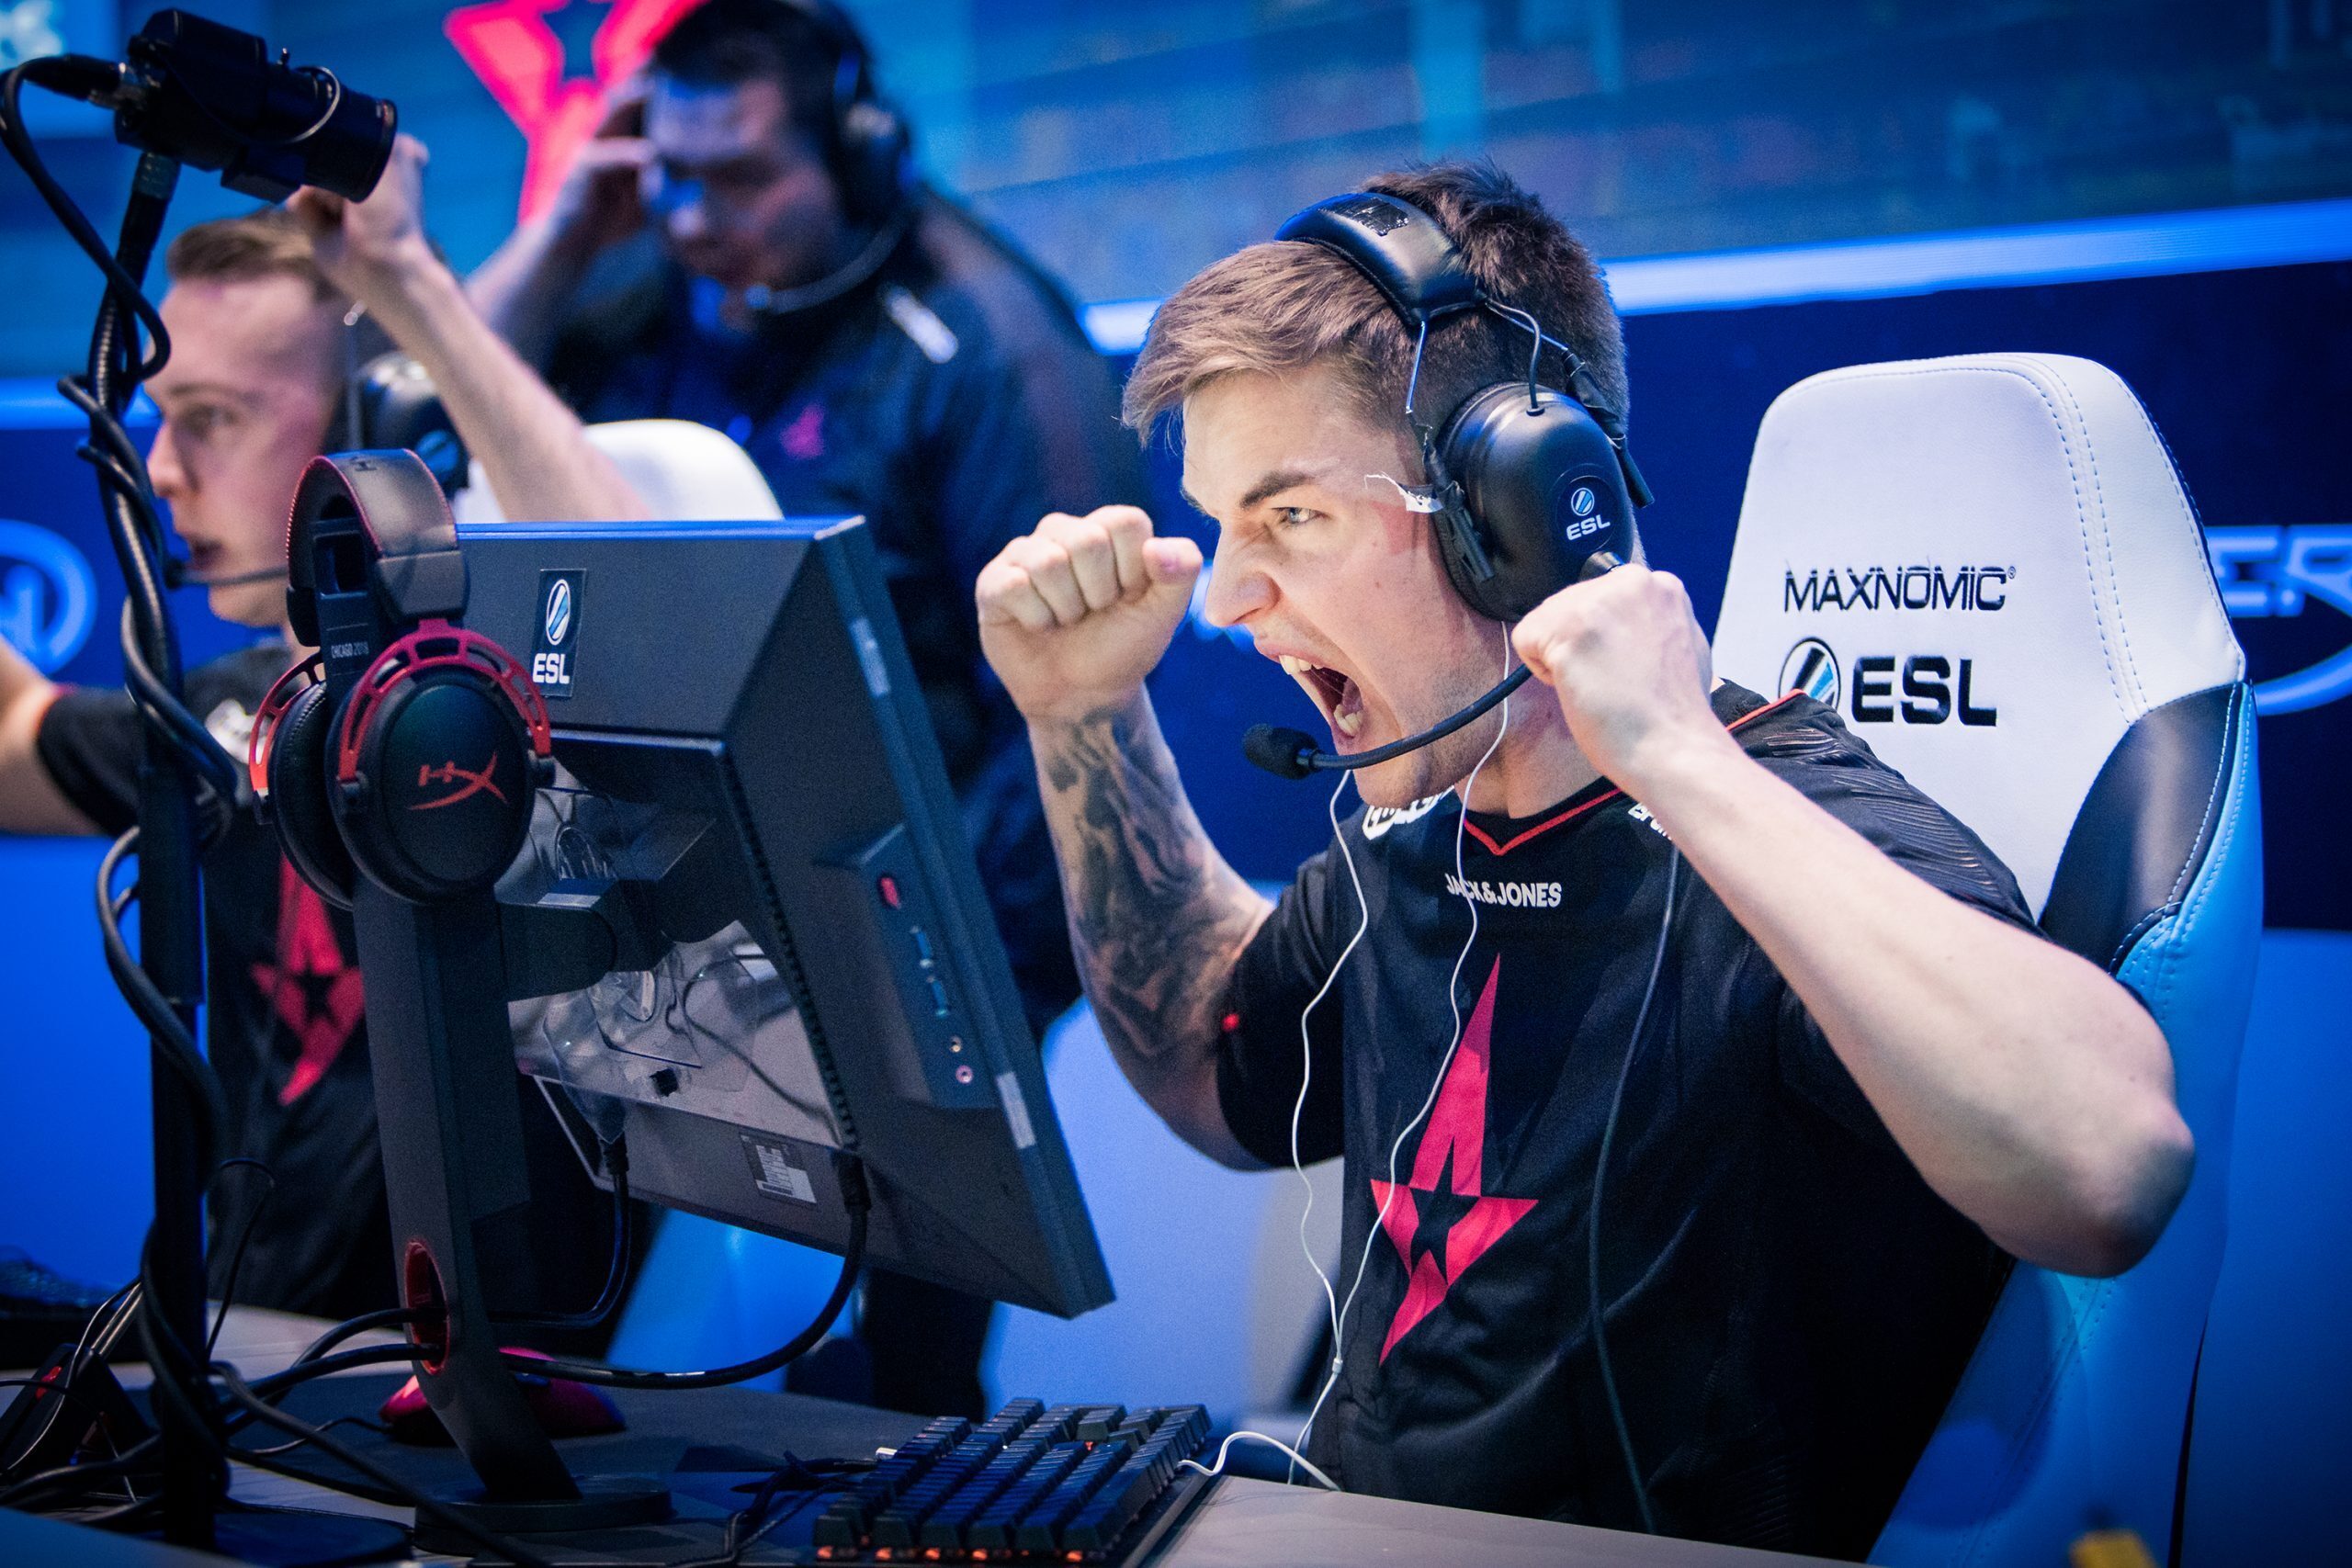 Astralis has been pitted as the #1 global ranked team in Counter-Strike since April and they’ve shown little signs of slowing down. (Photo courtesy of Helena Kristiansson